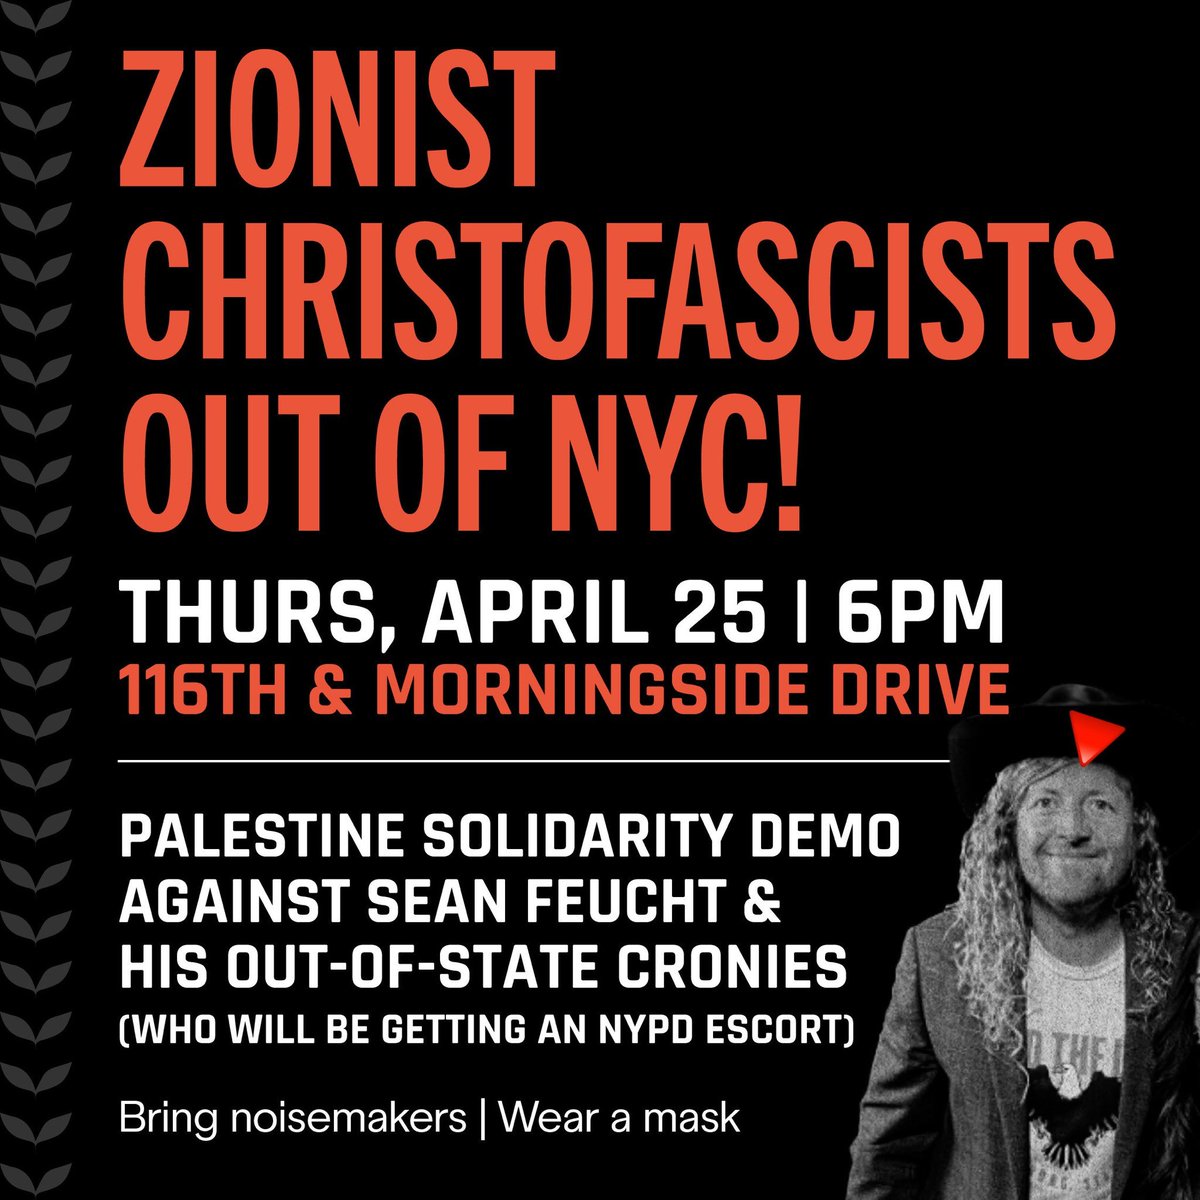 All out for Palestine tomorrow! Zionist Christofascist Sean Feucht and his cronies are coming to NYC. They do not care about the safety of Jewish people, and they CERTAINLY don’t care about Palestinian lives. ⏰ 6pm 📍 116 St & Morningside Drive 🥁 Bring whistles, drums etc